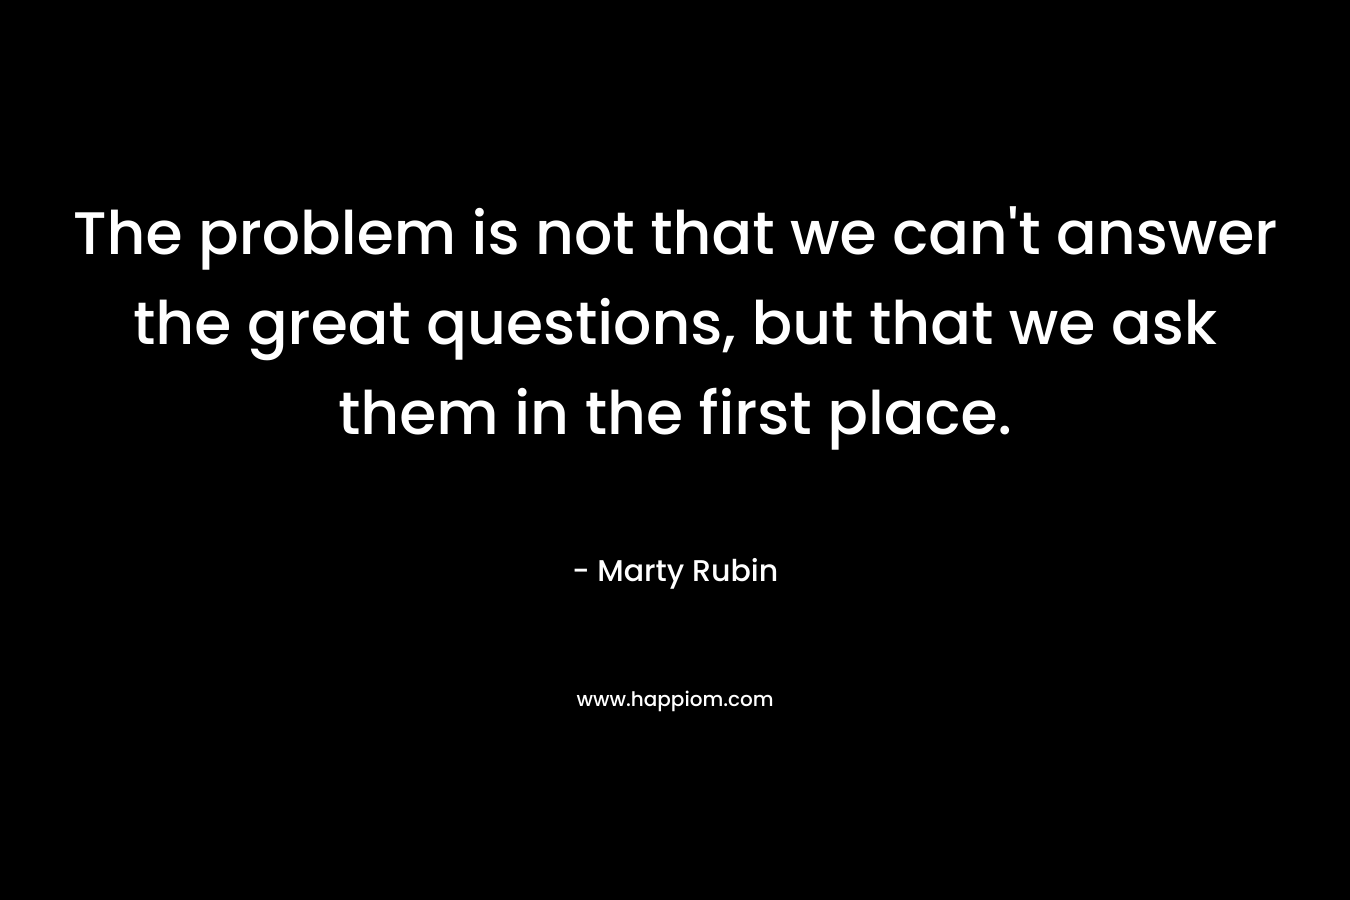 The problem is not that we can’t answer the great questions, but that we ask them in the first place. – Marty Rubin